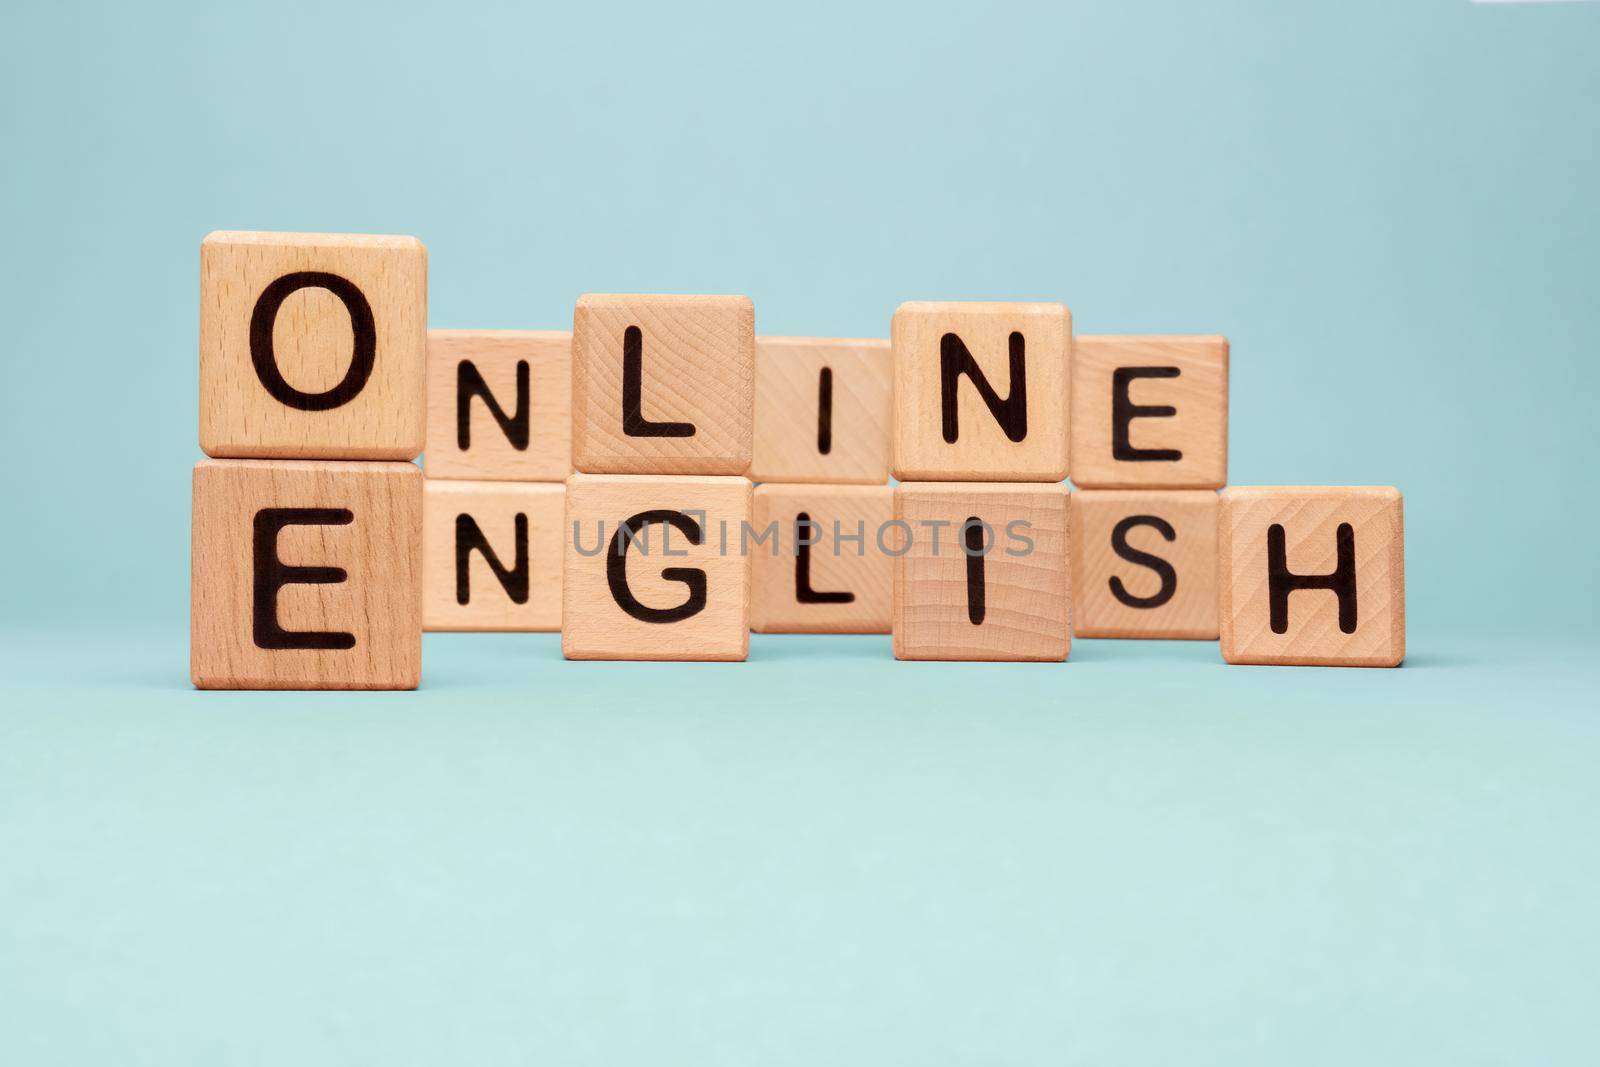 Word Online English letters blocks toy cubes. Speak English Online course icon wooden blocks concept foreign language tutoring. Learning Online English words block wooden cubes concept language course by synel